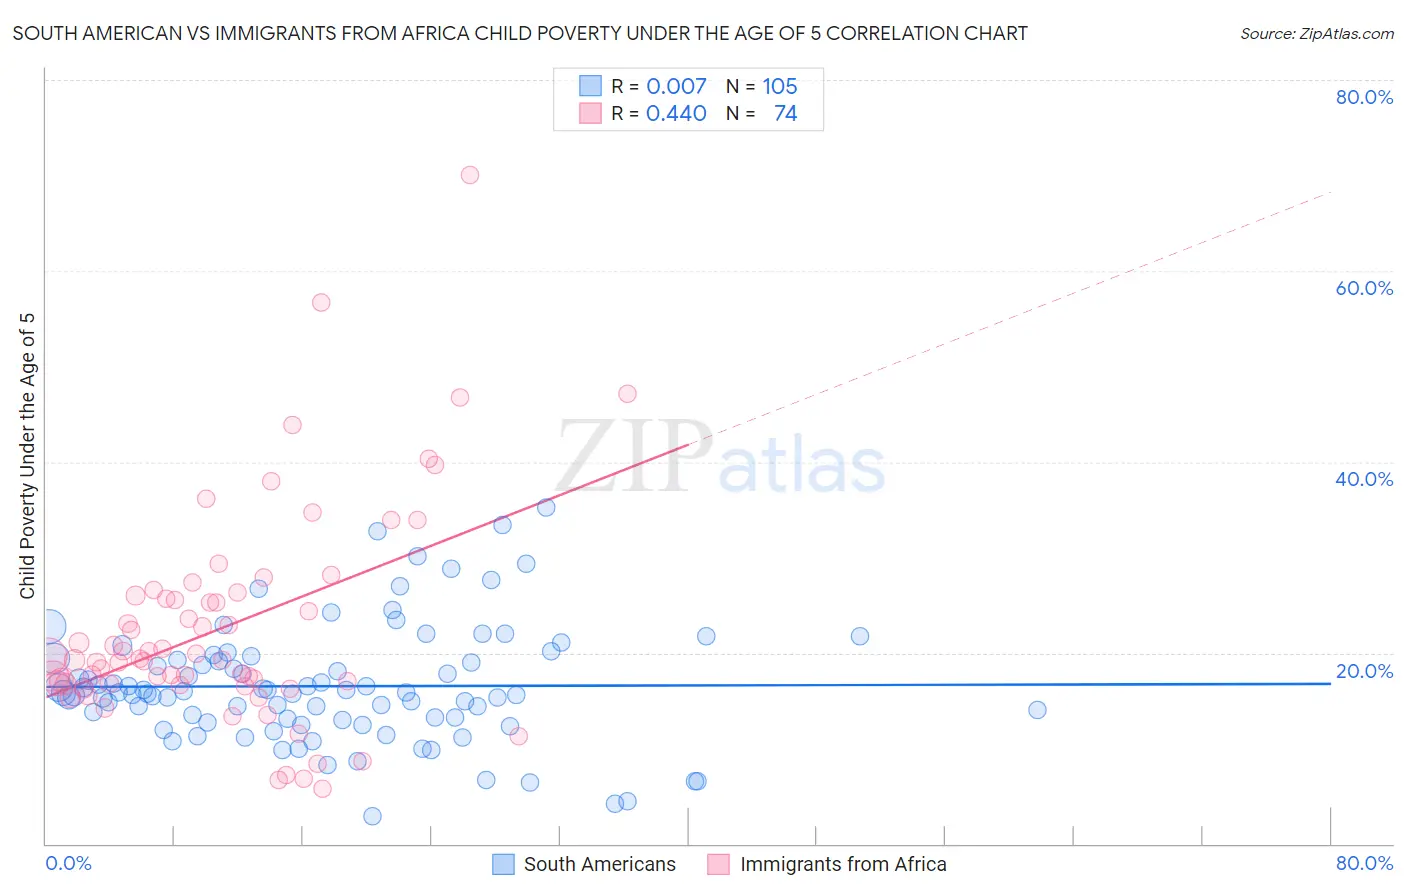 South American vs Immigrants from Africa Child Poverty Under the Age of 5